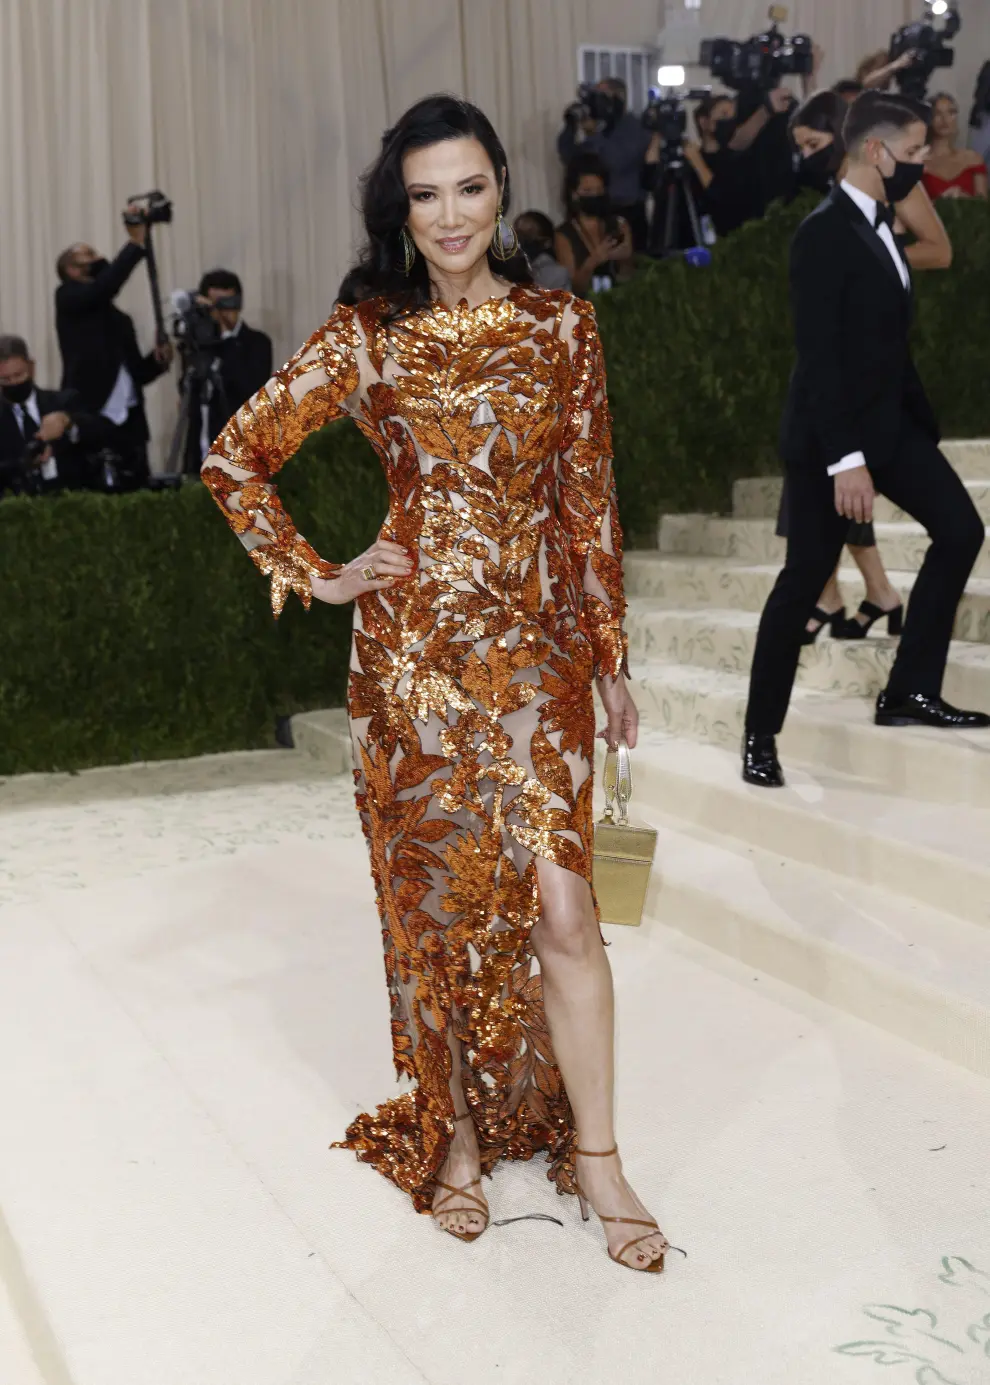 New York (United States), 13/09/2021.- Eileen Gu poses on the red carpet for the 2021 Met Gala, the annual benefit for the Metropolitan Museum of Art's Costume Institute, in New York, New York, USA, 13 September 2021. The event coincides with the Met Costume Institute's first two-part exhibition, 'In America: A Lexicon of Fashion' which opens 18 September 2021, to be followed by 'In America: An Anthology of Fashion' which opens 05 May 2022 and both conclude 05 September 2022. (Moda, Abierto, Estados Unidos, Nueva York) EFE/EPA/JUSTIN LANE EPA-EFE/JUSTIN LANE EPA-EFE/JUSTIN LANE
 USA NEW YORK MET GALA